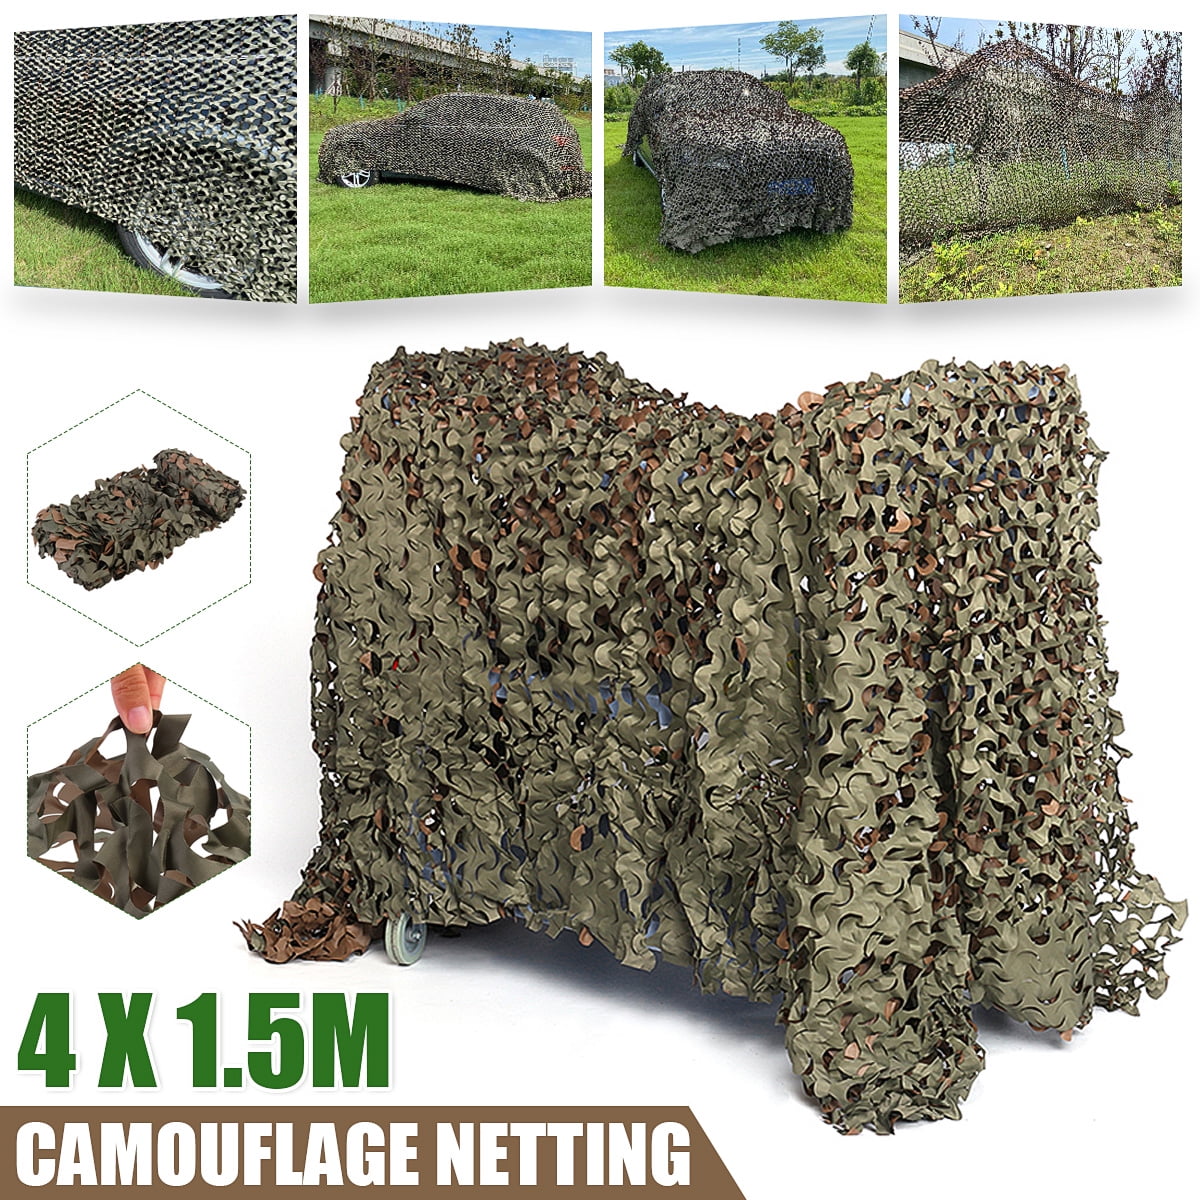 10Mx1.5M Camouflage Net Camo Hunting Shooting Hide Army Camping Woodland Netting 